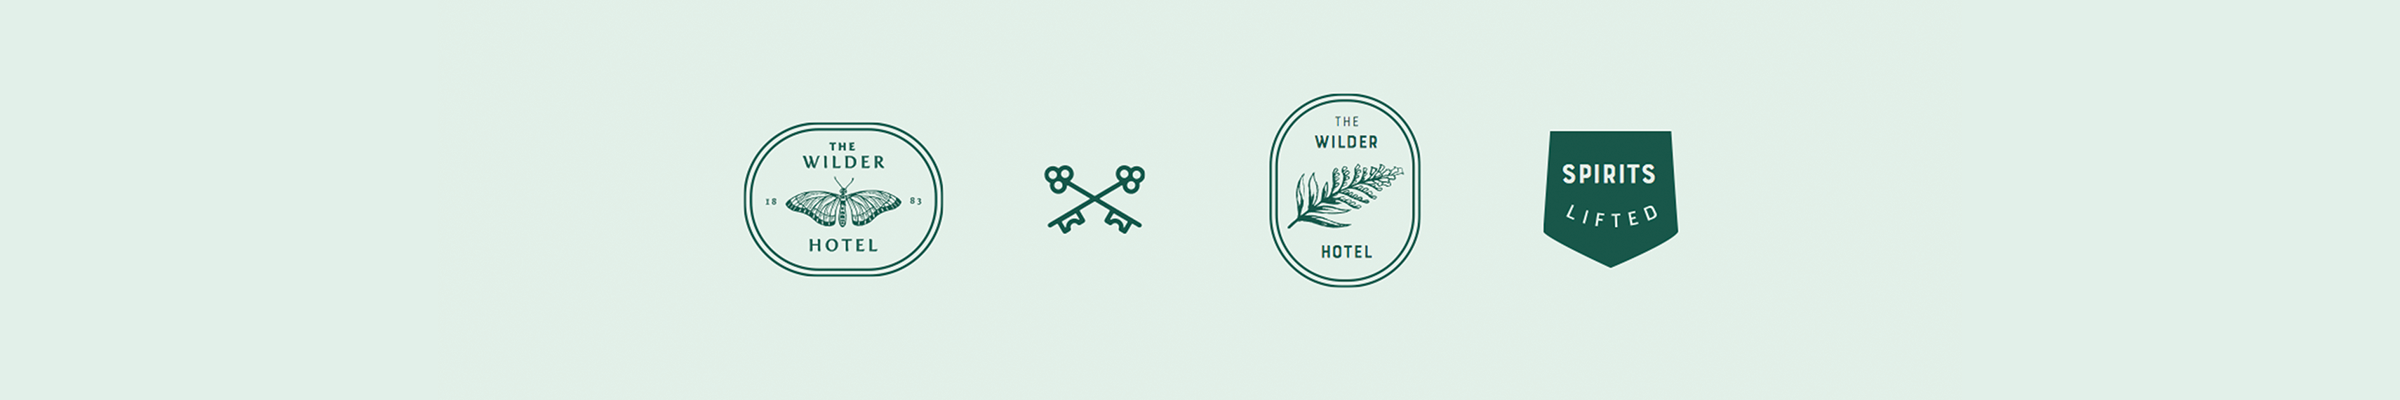 Simple illustrations for The Wilder Hotel.